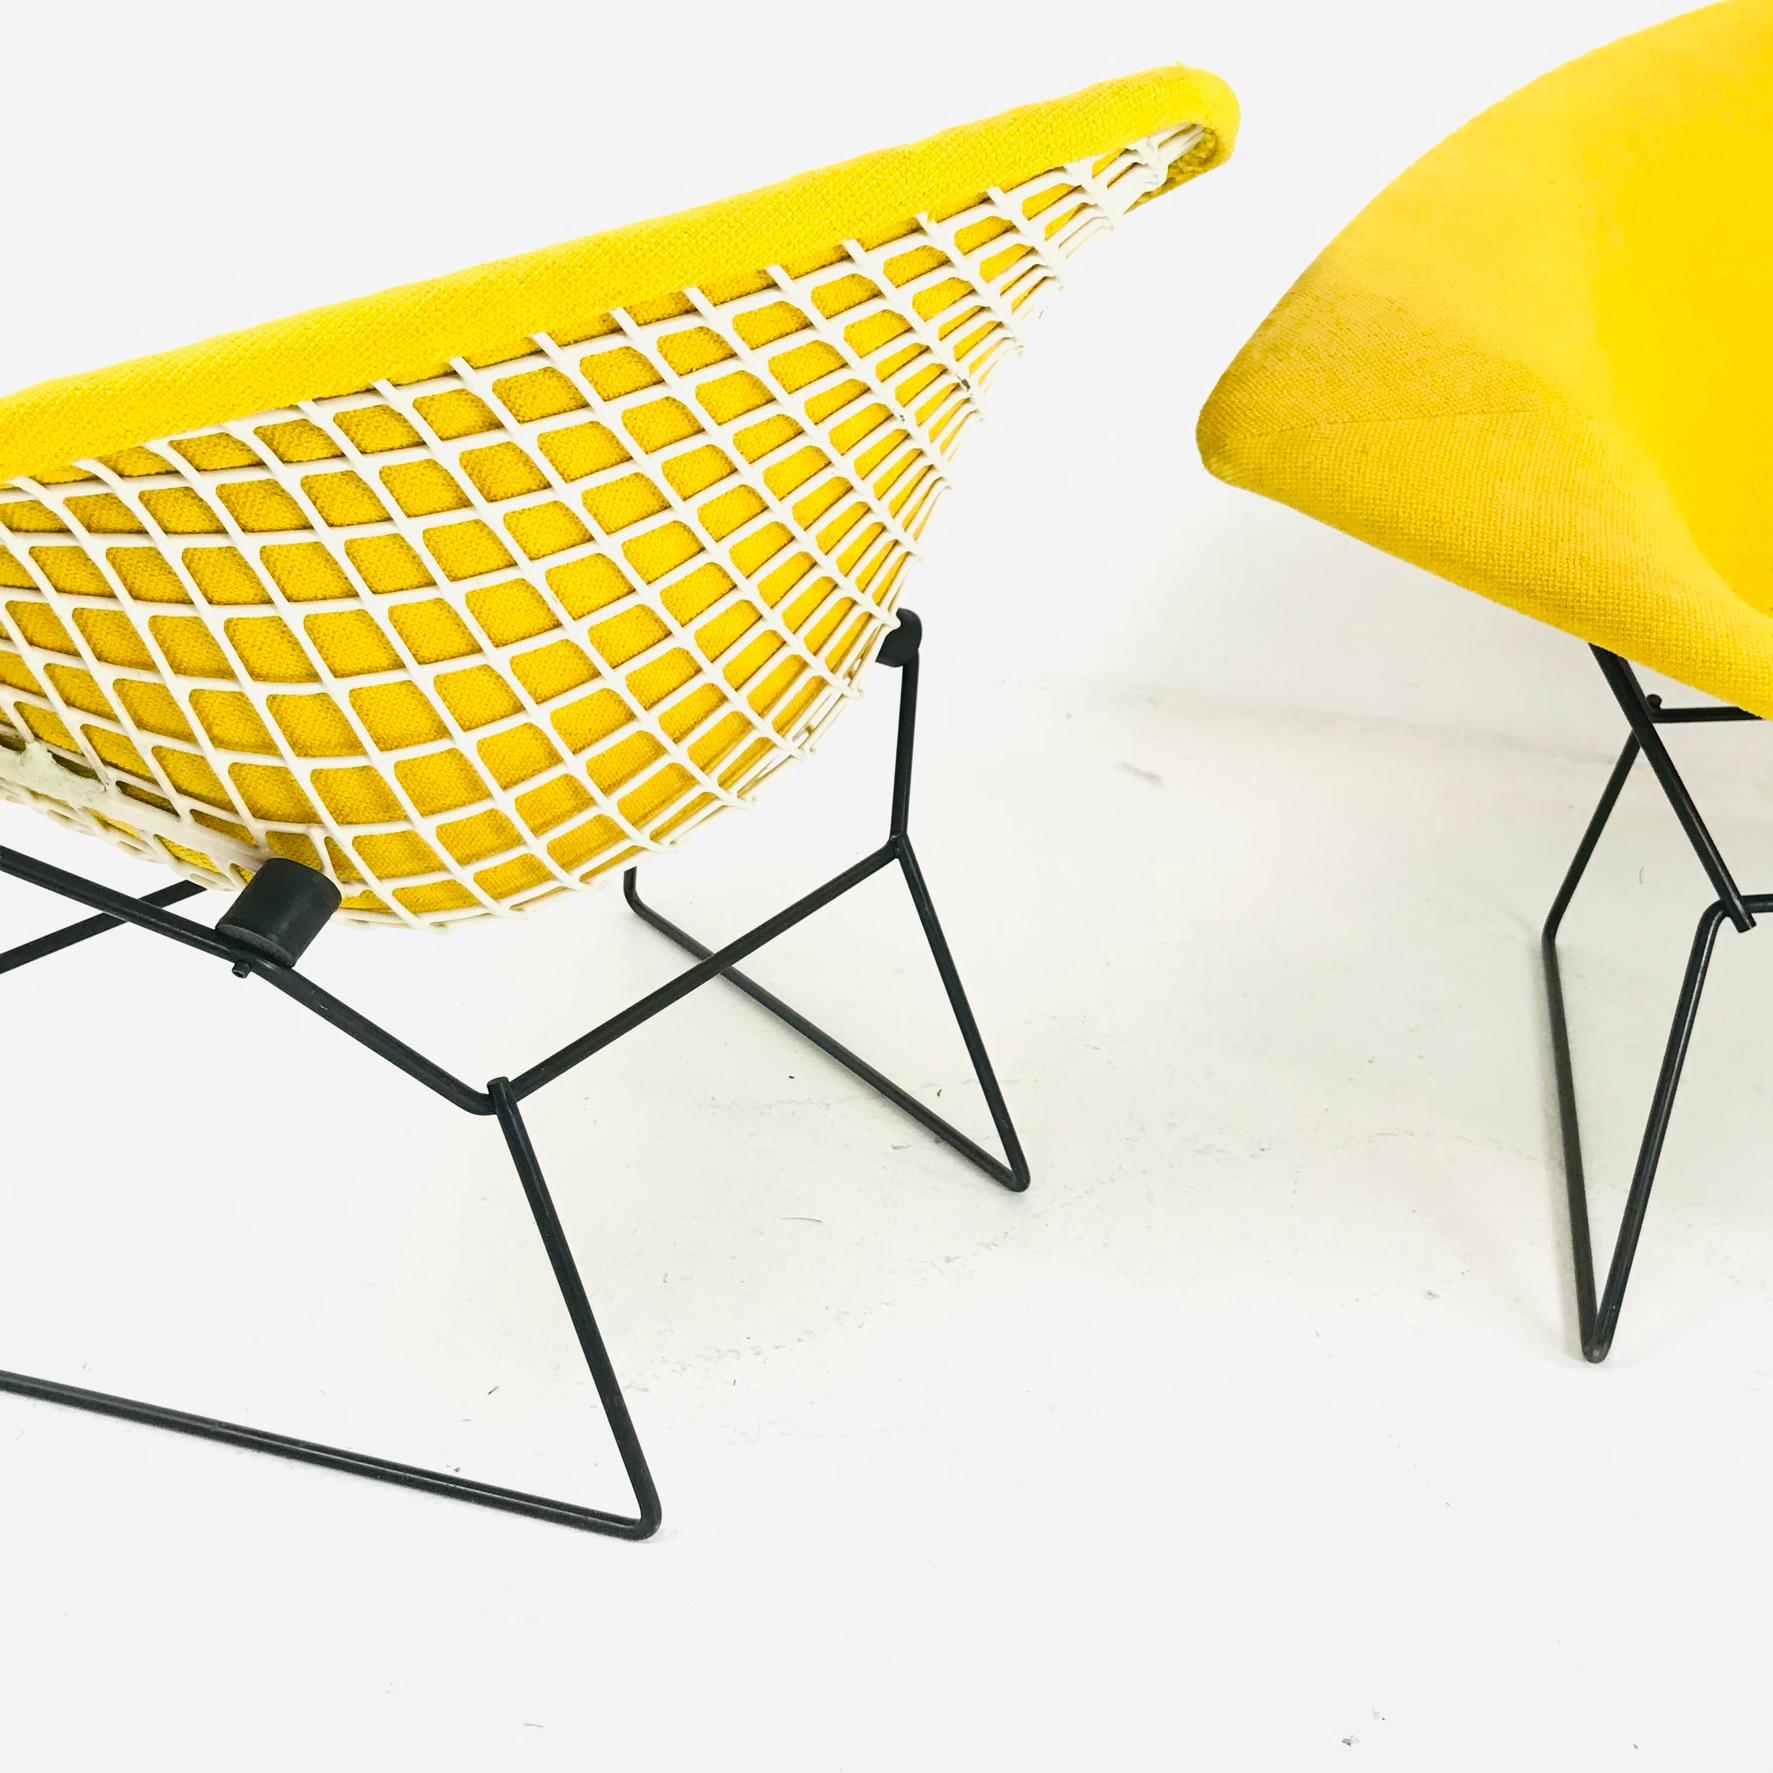 Pair of Large Diamond Chairs by Harry Bertoia for Knoll In Good Condition For Sale In Dallas, TX